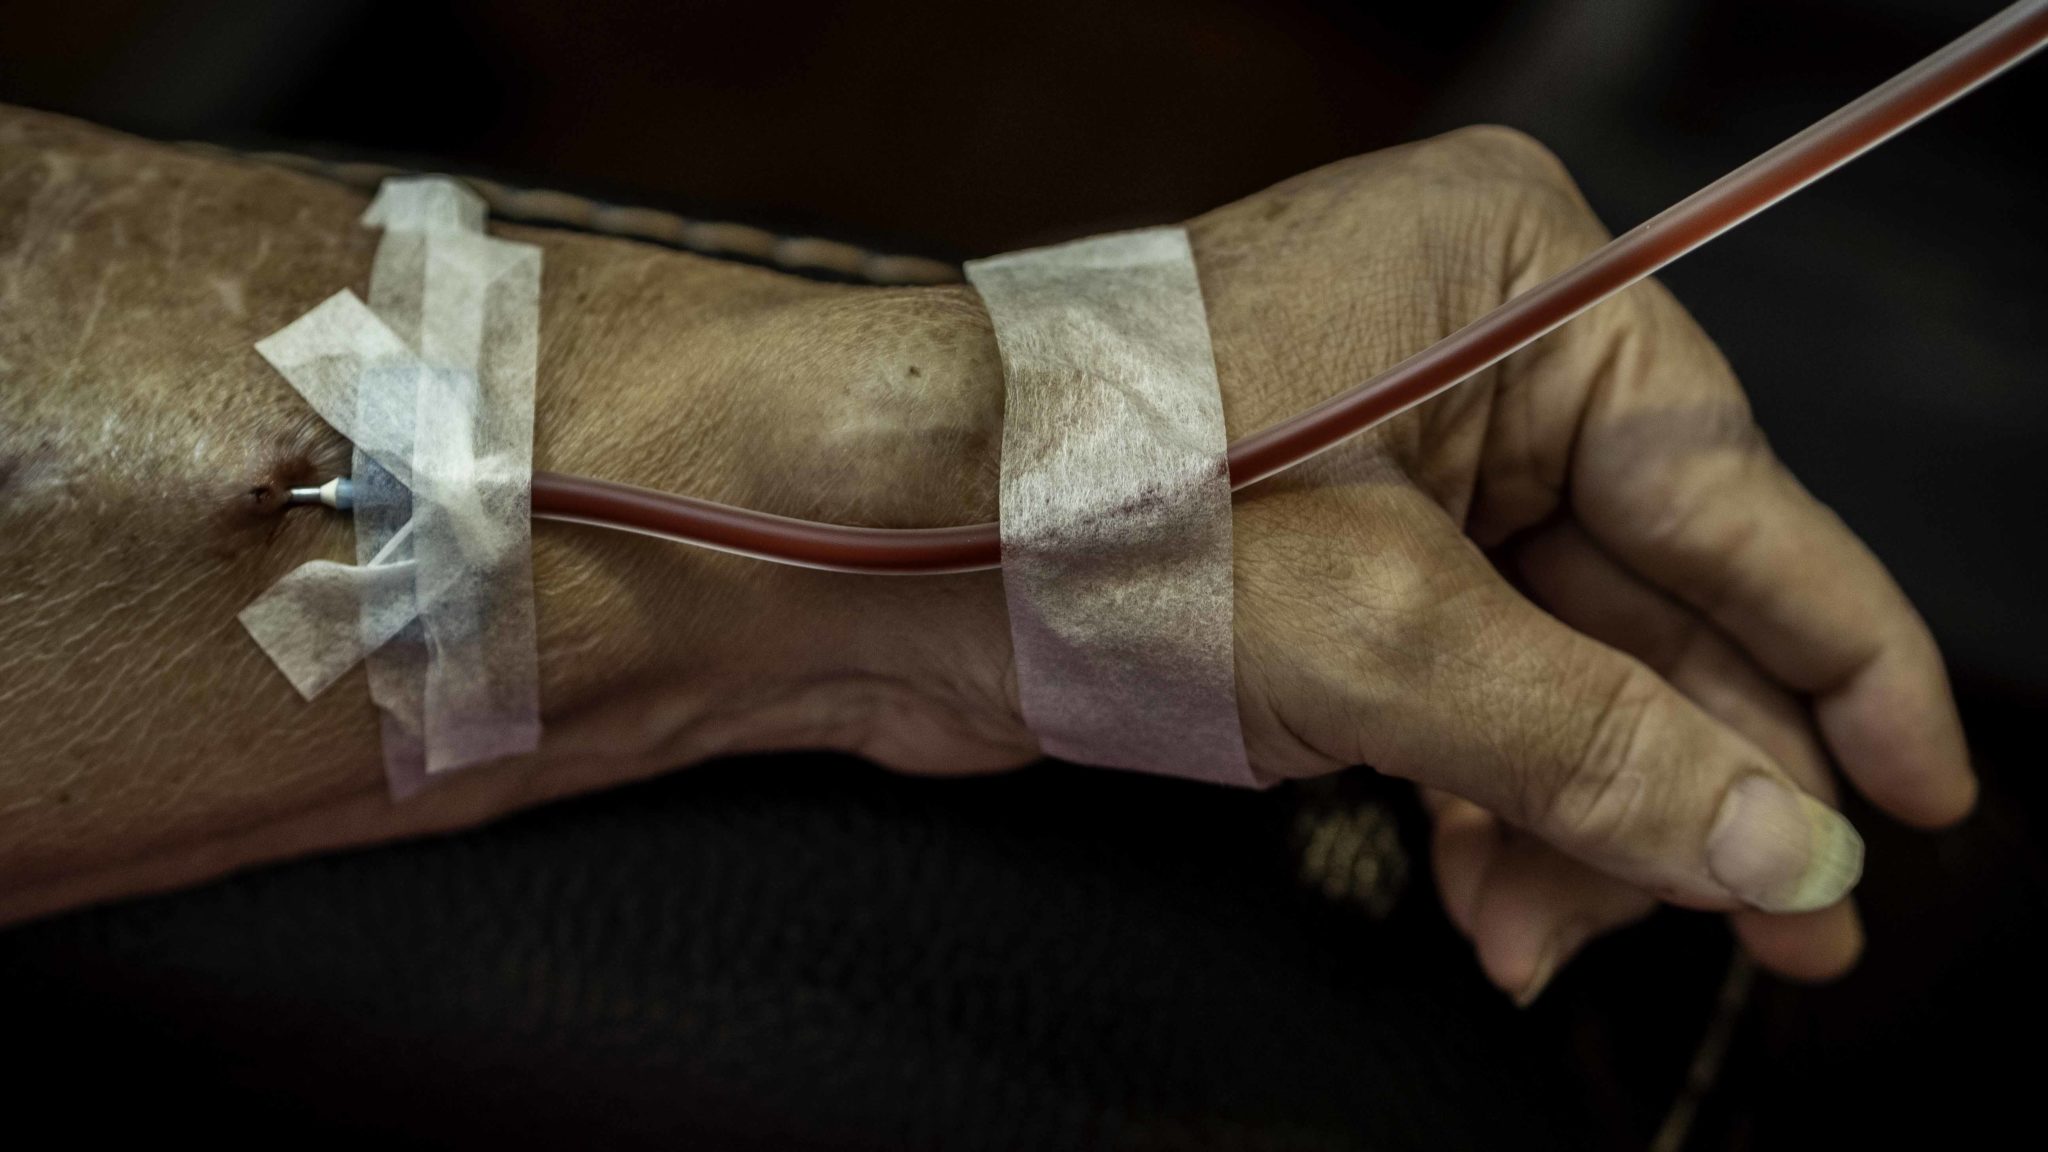 Jo Karabasz says she’s handled a lot in her 58 years of life, but when it comes to her dialysis, she needs things to go smoothly. “Just don’t fuss with me,” she said.